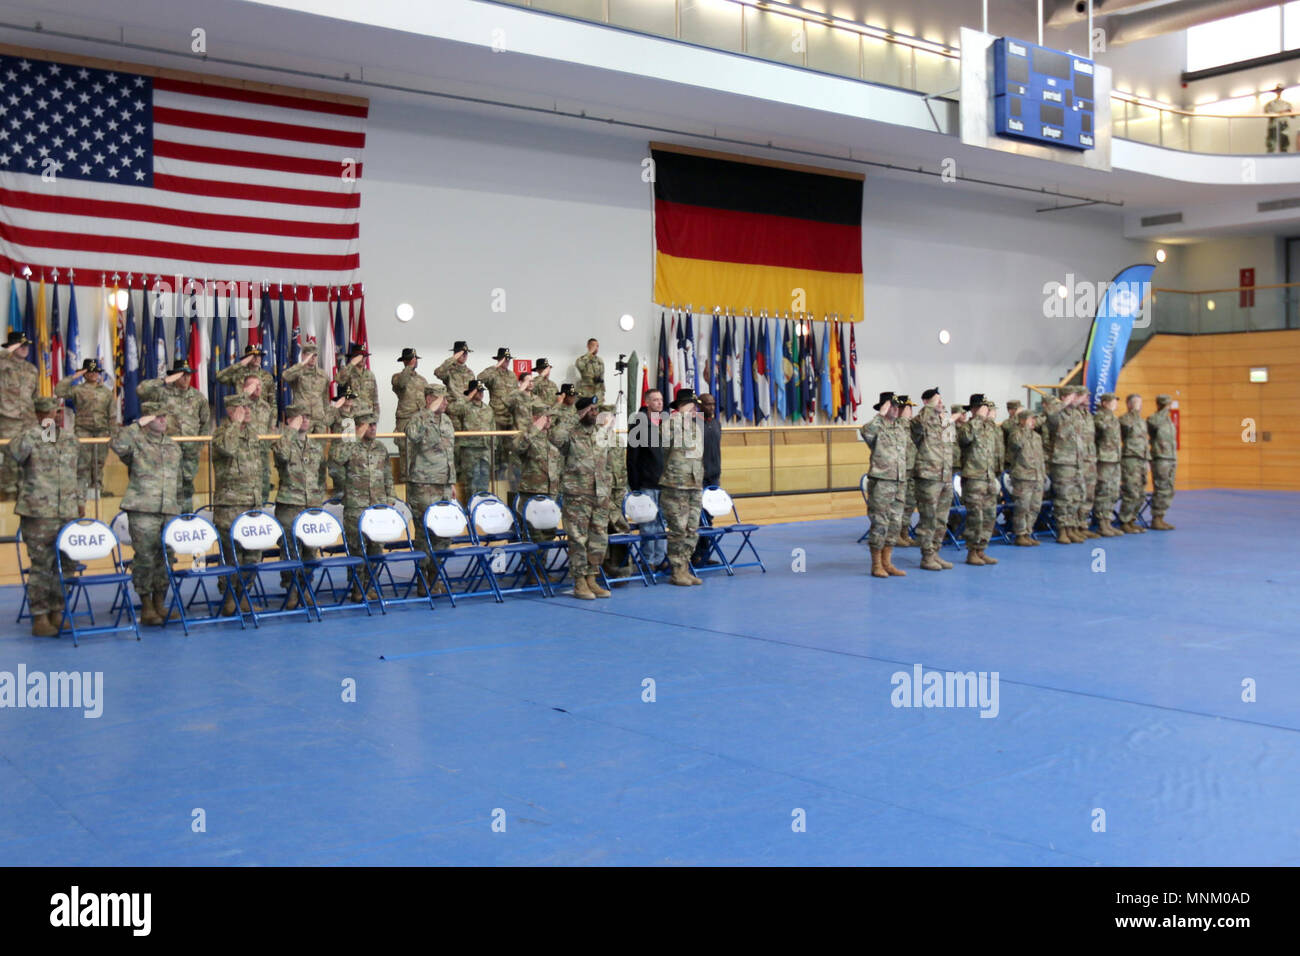 Soldiers from the 5th Squadron, 4th Cavalry Regiment, 2nd Armored Brigade Combat Team, 1st Infantry Division, salute for the playing of the U.S. and German national anthems during a change of command ceremony at the Tower Barracks Physical Fitness Center, Grafenwoehr, Germany, March 17, 2018. Lt. Col. James D. Maxwell relinquished command to Lt. Col. William Bowers during the ceremony. Stock Photo